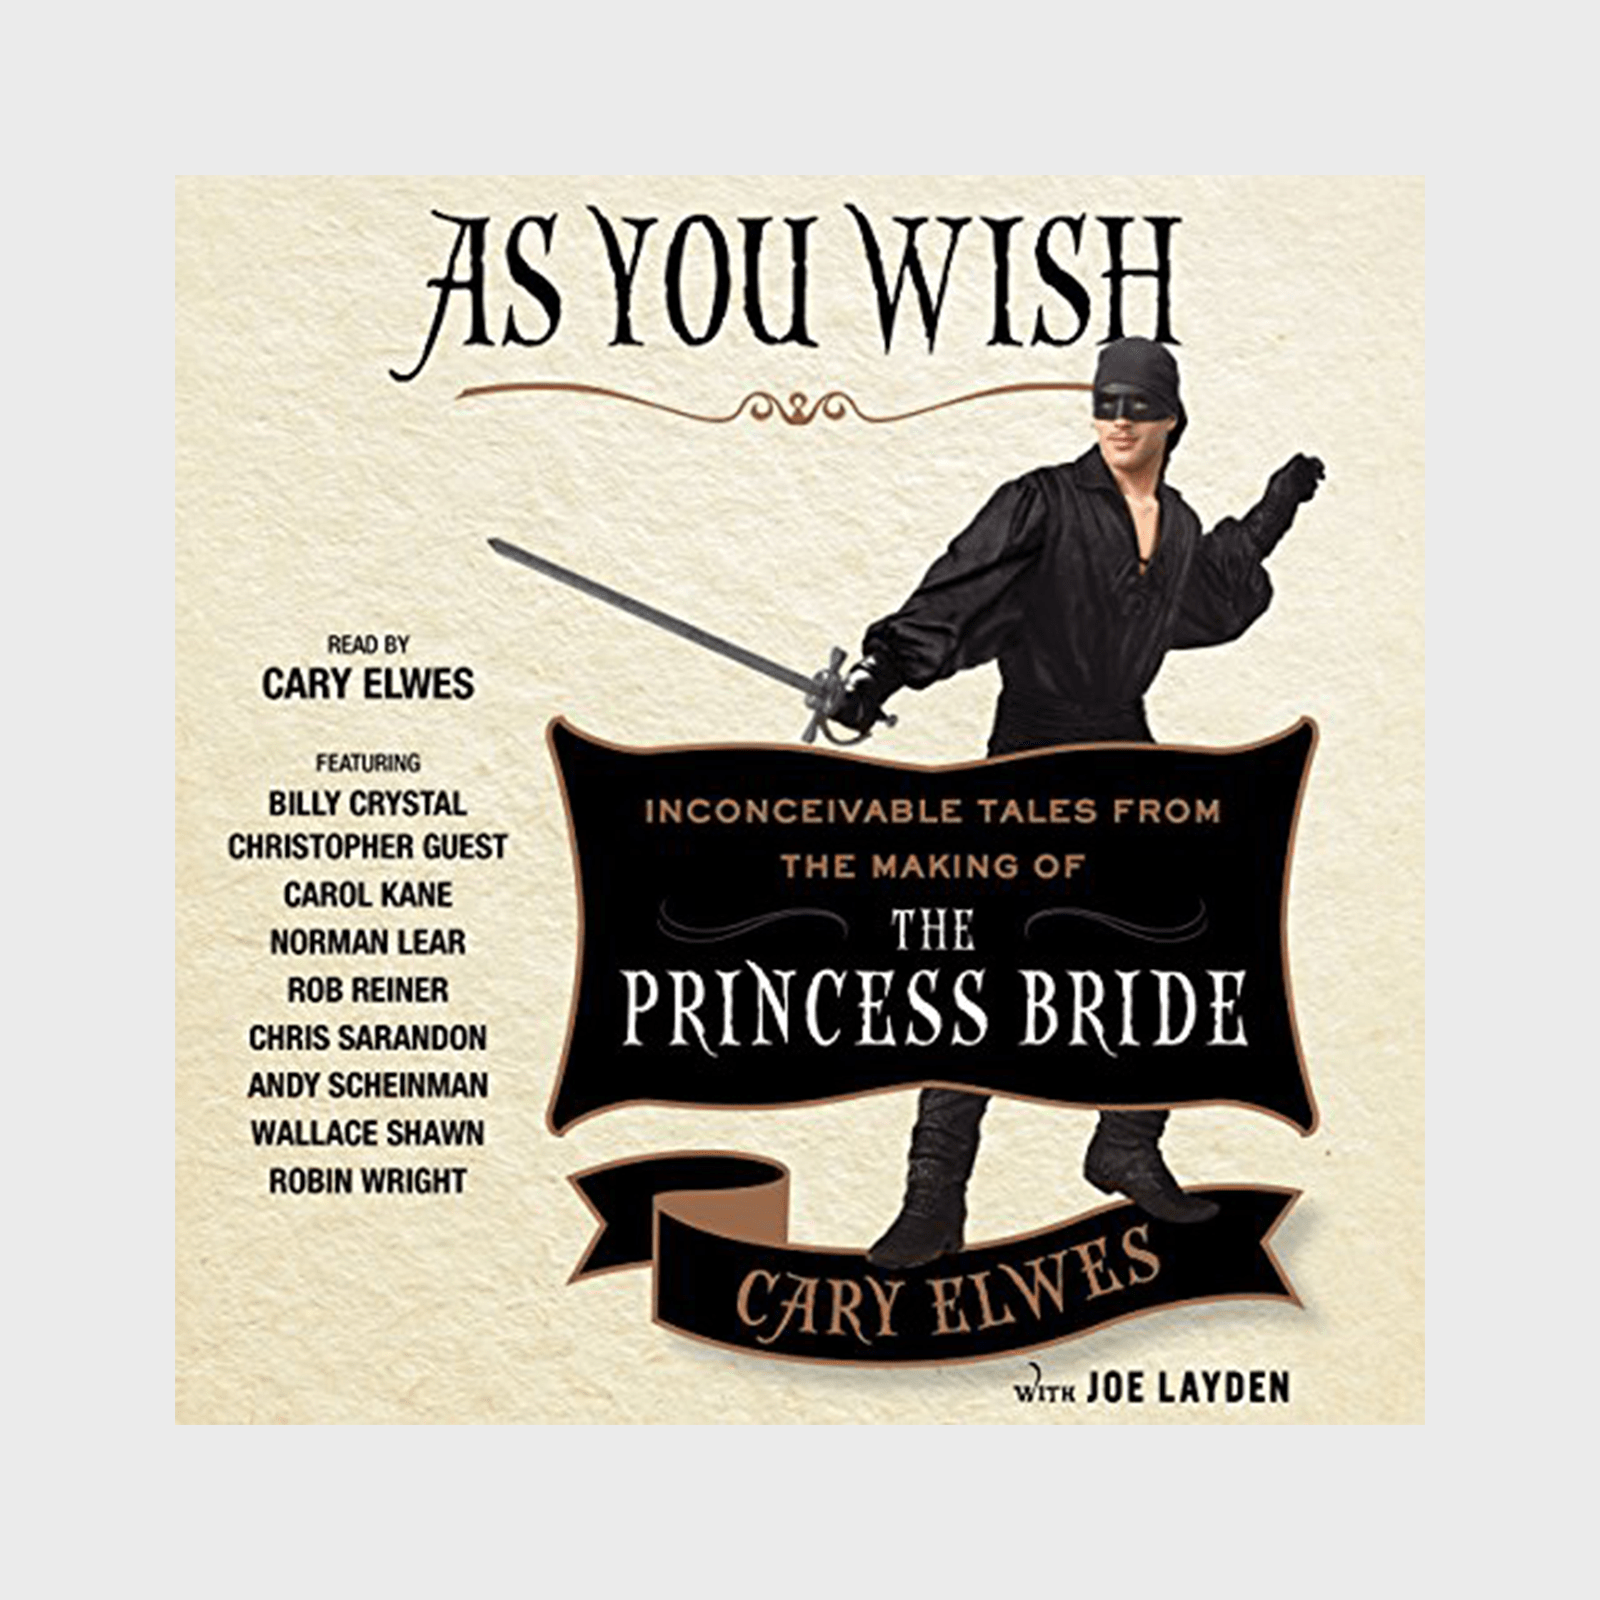 <h3 class=""><strong><em>As You Wish: Inconceivable Tales from the Making of </em>The Princess Bride by Cary Elwes</strong></h3> <p>Although it's not specifically written for kids, fans of all ages will enjoy this behind-the-scenes look at one of the most beloved <a href="https://www.rd.com/list/funny-family-movies/" rel="noopener noreferrer">funny family movies</a>—and what better way to get youngsters interested in nonfiction? Westley himself, Cary Elwes, narrates <a href="https://www.amazon.com/As-You-Wish-Cary-Elwes-Christopher-Guest/dp/B00NLKFVRS" rel="noopener noreferrer"><em>As You Wish</em></a> (which he also wrote) chronicling the making of the classic. He also snagged interviews with castmates including Billy Crystal, Robin Wright, Wallace Shawn, and Carol Kane, plus director Rob Reiner. Perfect for listening to during a family road trip!</p> <p class="listicle-page__cta-button-shop"><a class="shop-btn" href="https://www.amazon.com/As-You-Wish-Cary-Elwes-Christopher-Guest/dp/B00NLKFVRS">Shop Now</a></p>